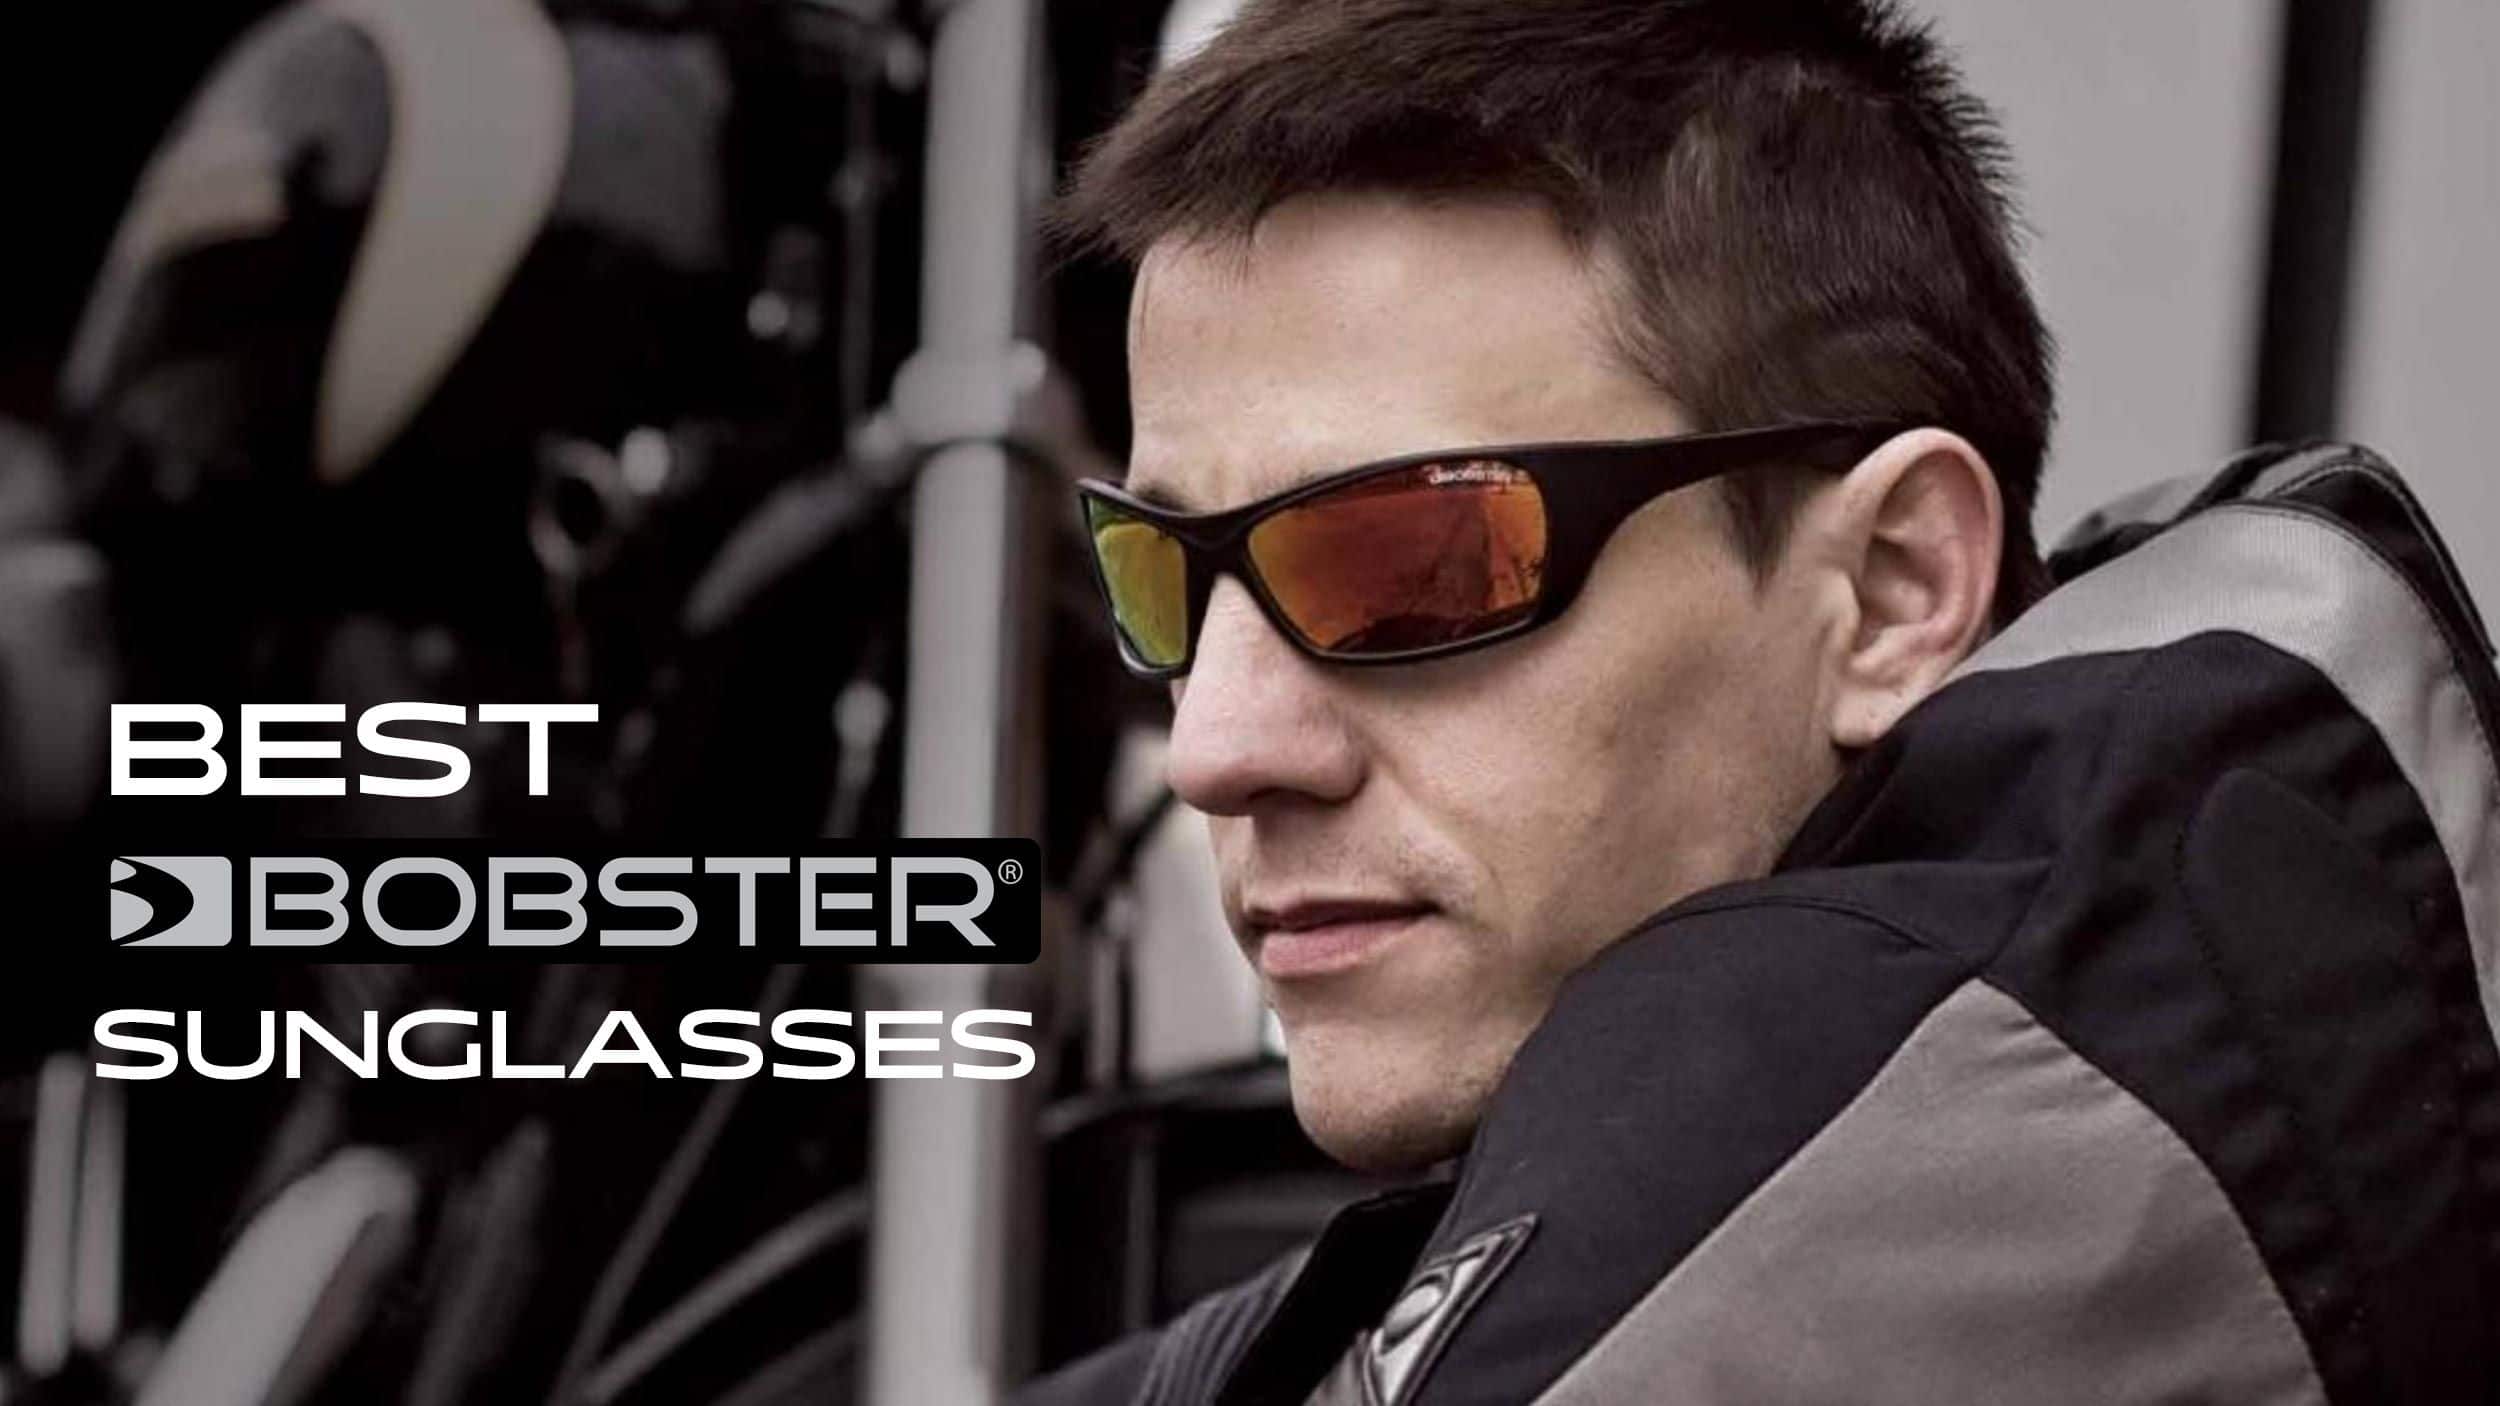 BOBSTER RALLY CONVERTIBLE GLASSES CLR/GRY W/3 REMOVABLE LENSES BRAL001 